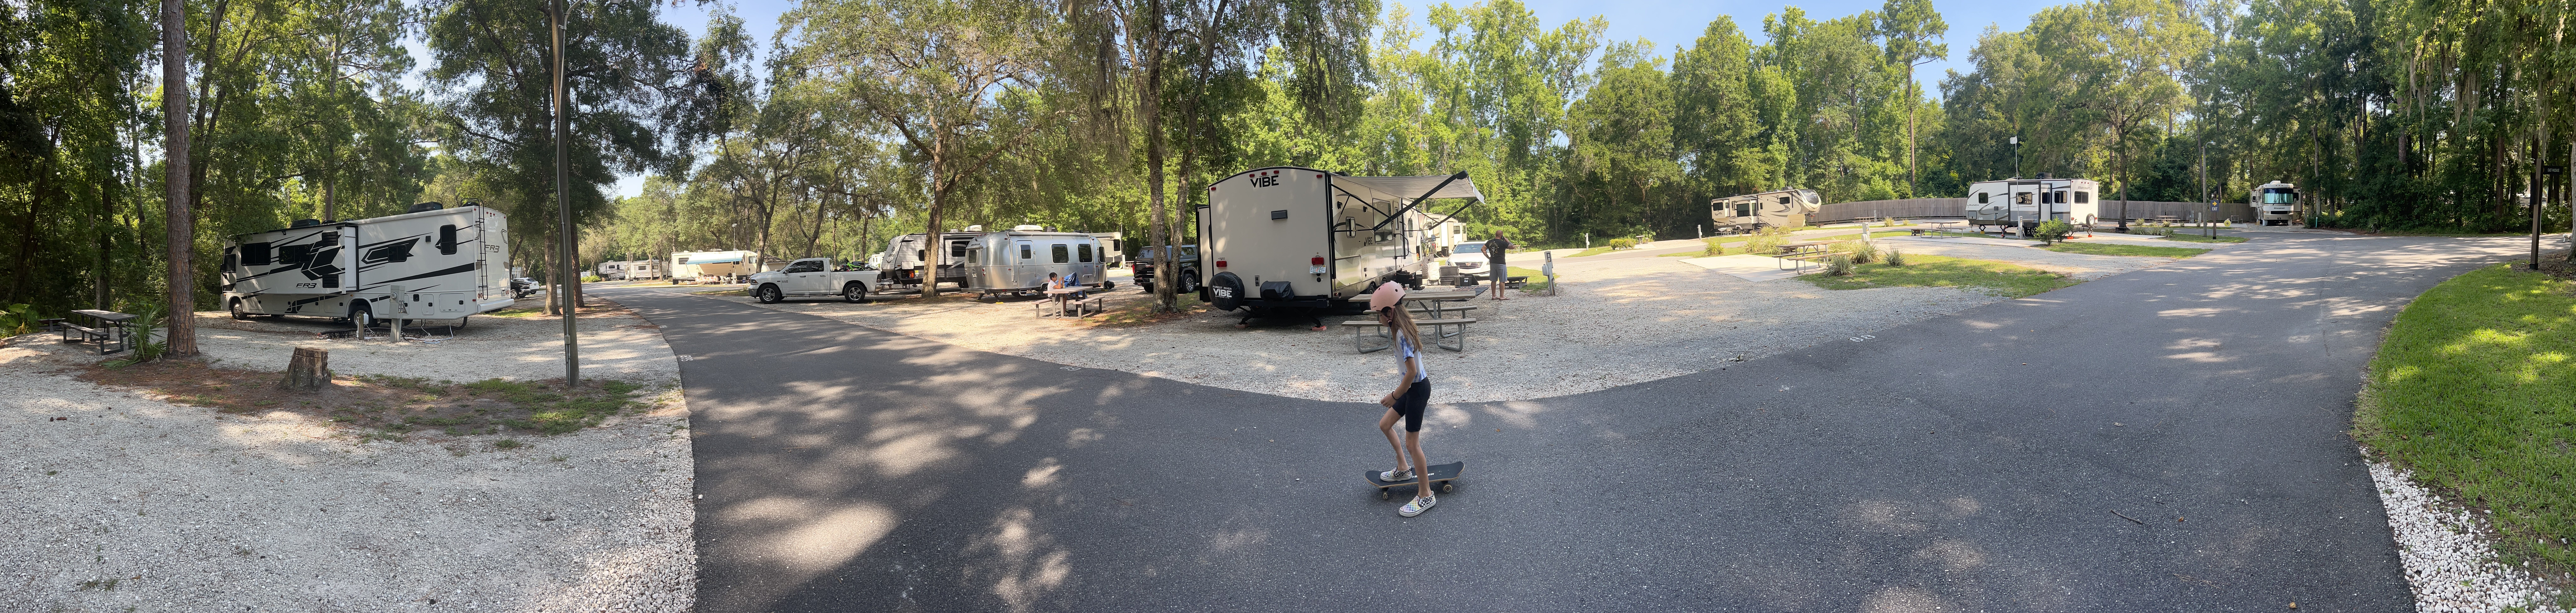 Camper submitted image from Compass RV Park - 5